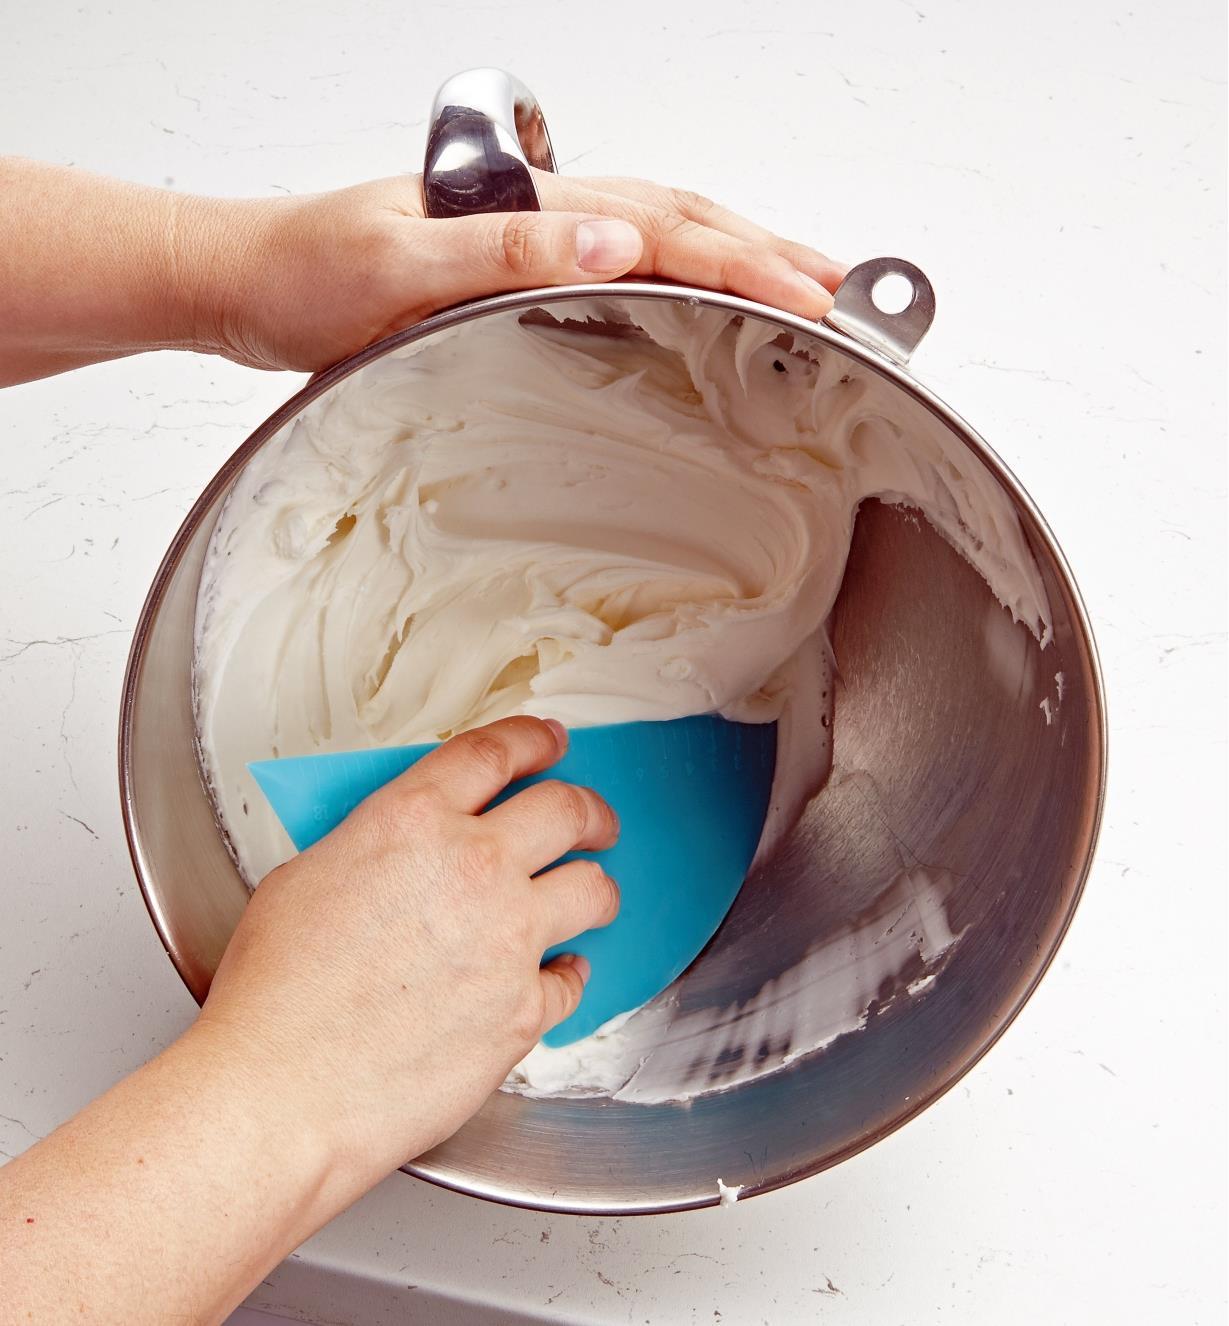 Scraping frosting from a bowl using the Bowl Scraper